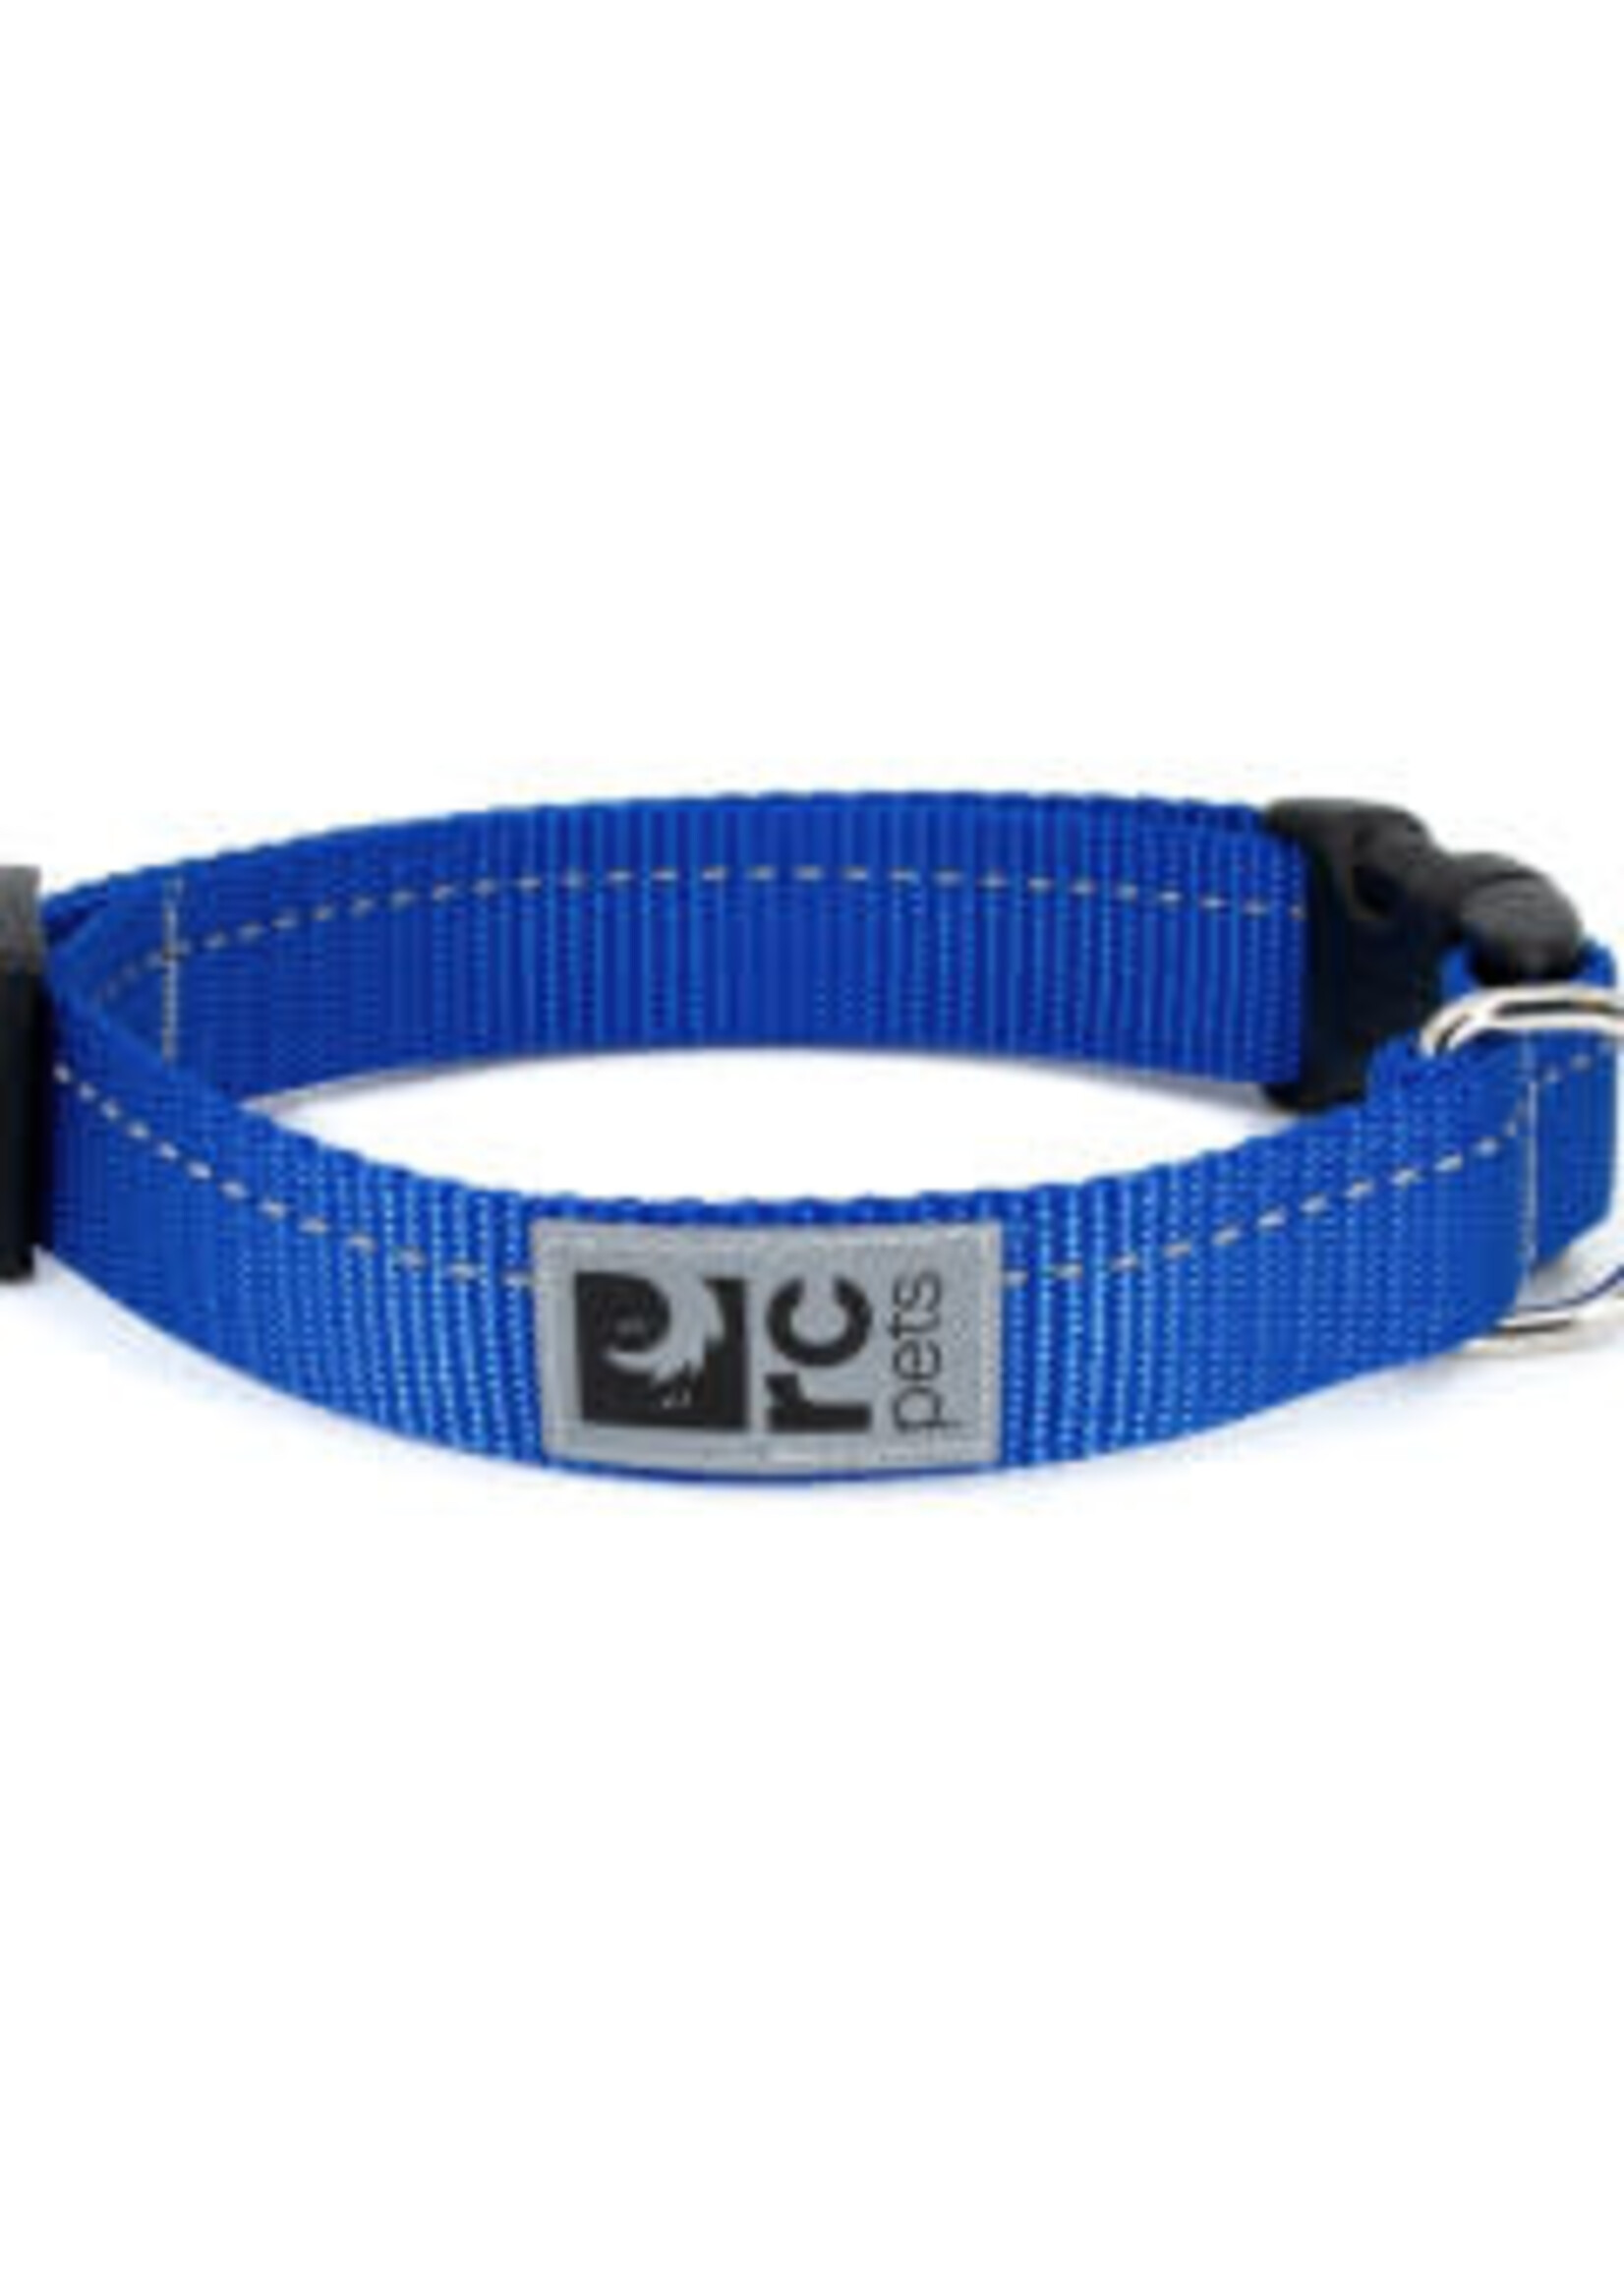 RC Pets Products RC Pets - Clip Collar Primary Royal Blue Large 1"